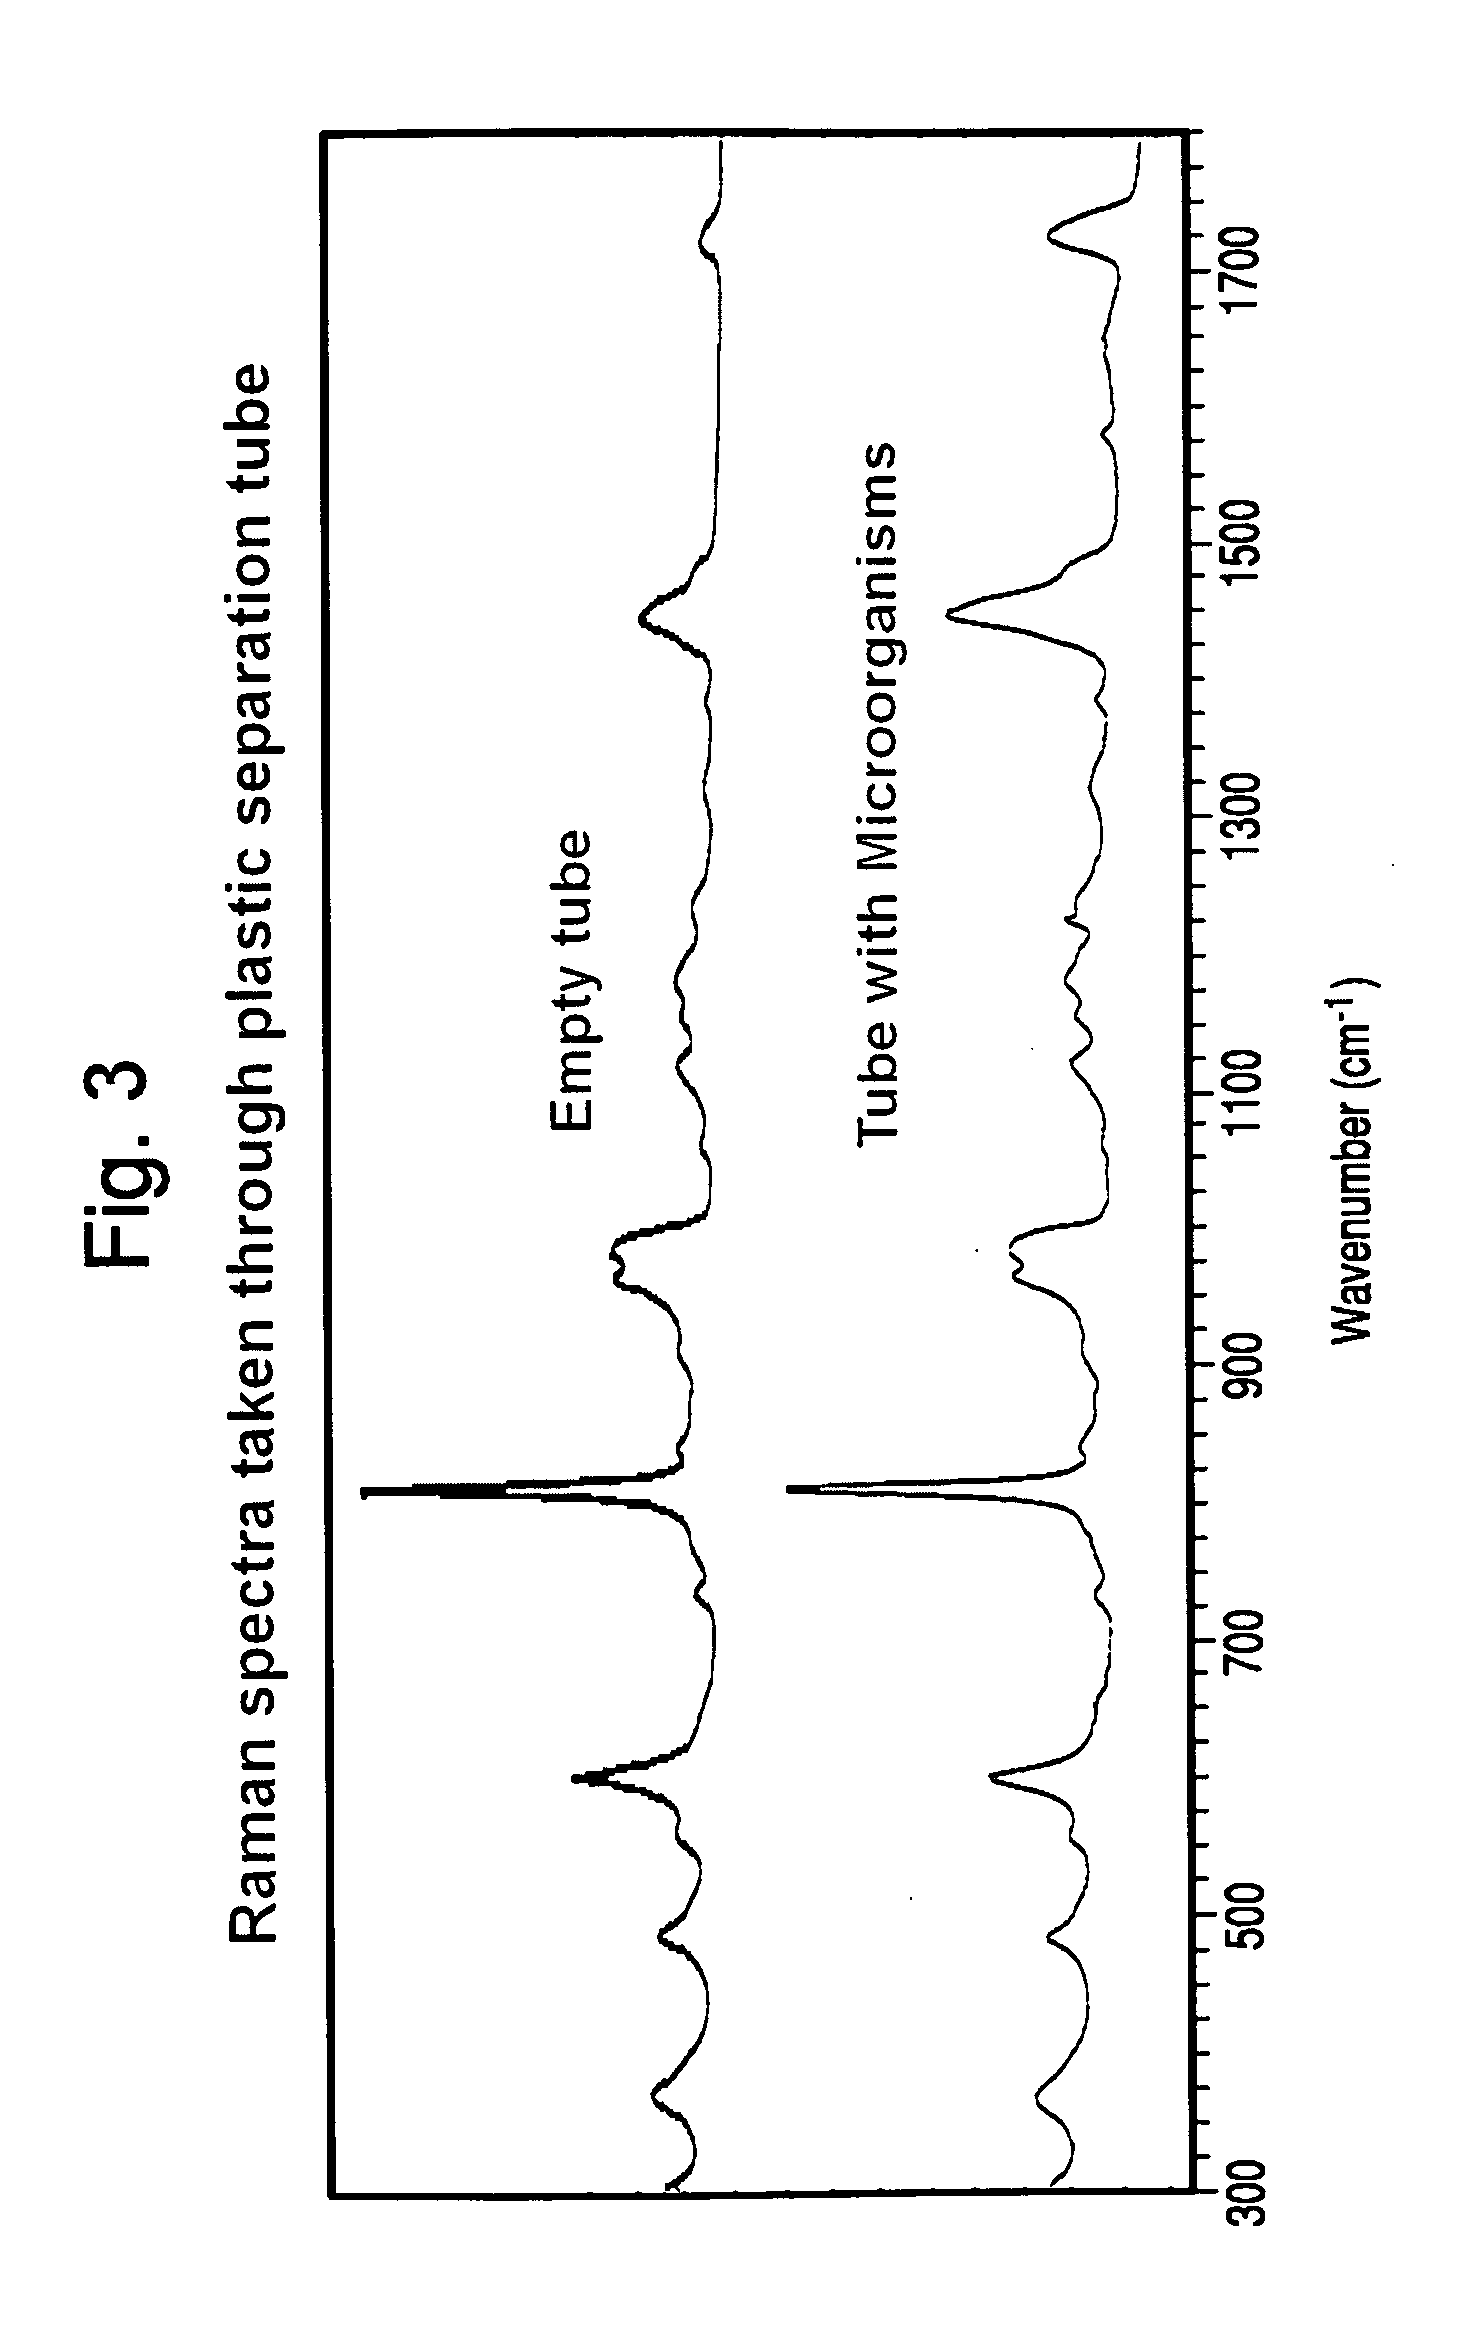 Method for separation, characterization and/or identification of microorganisms using raman spectroscopy